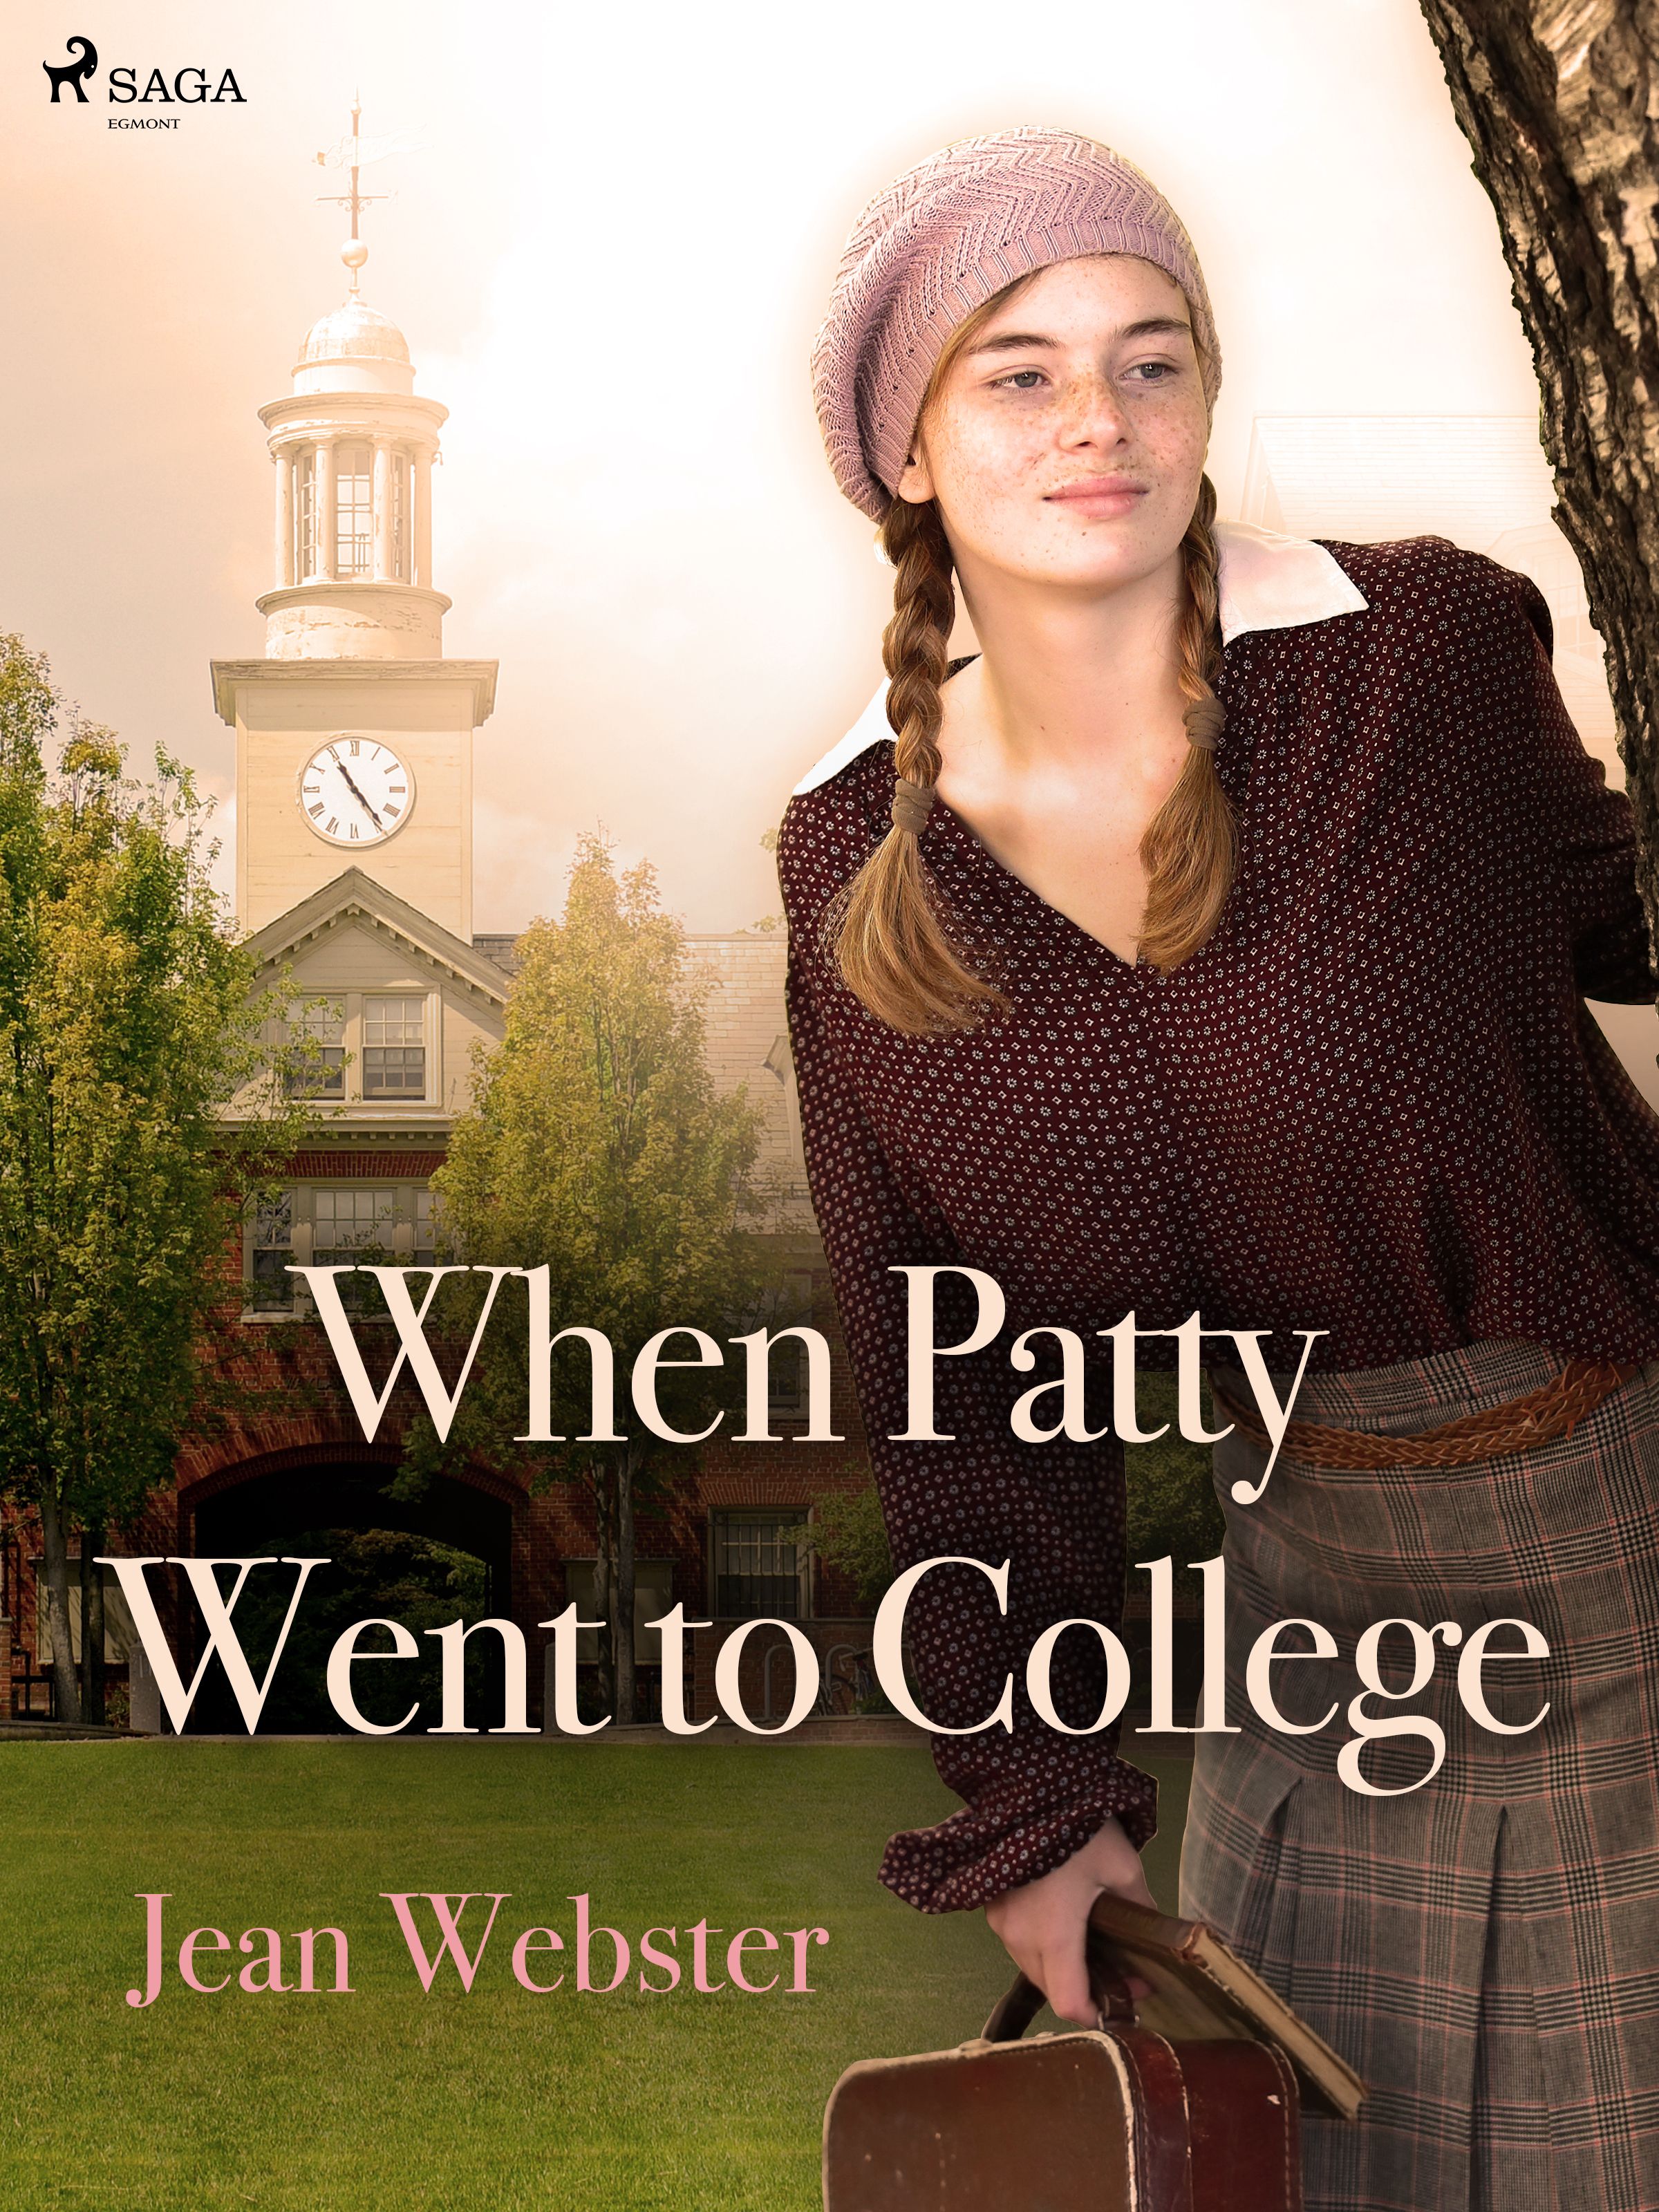 When Patty Went to College, eBook by Jean Webster